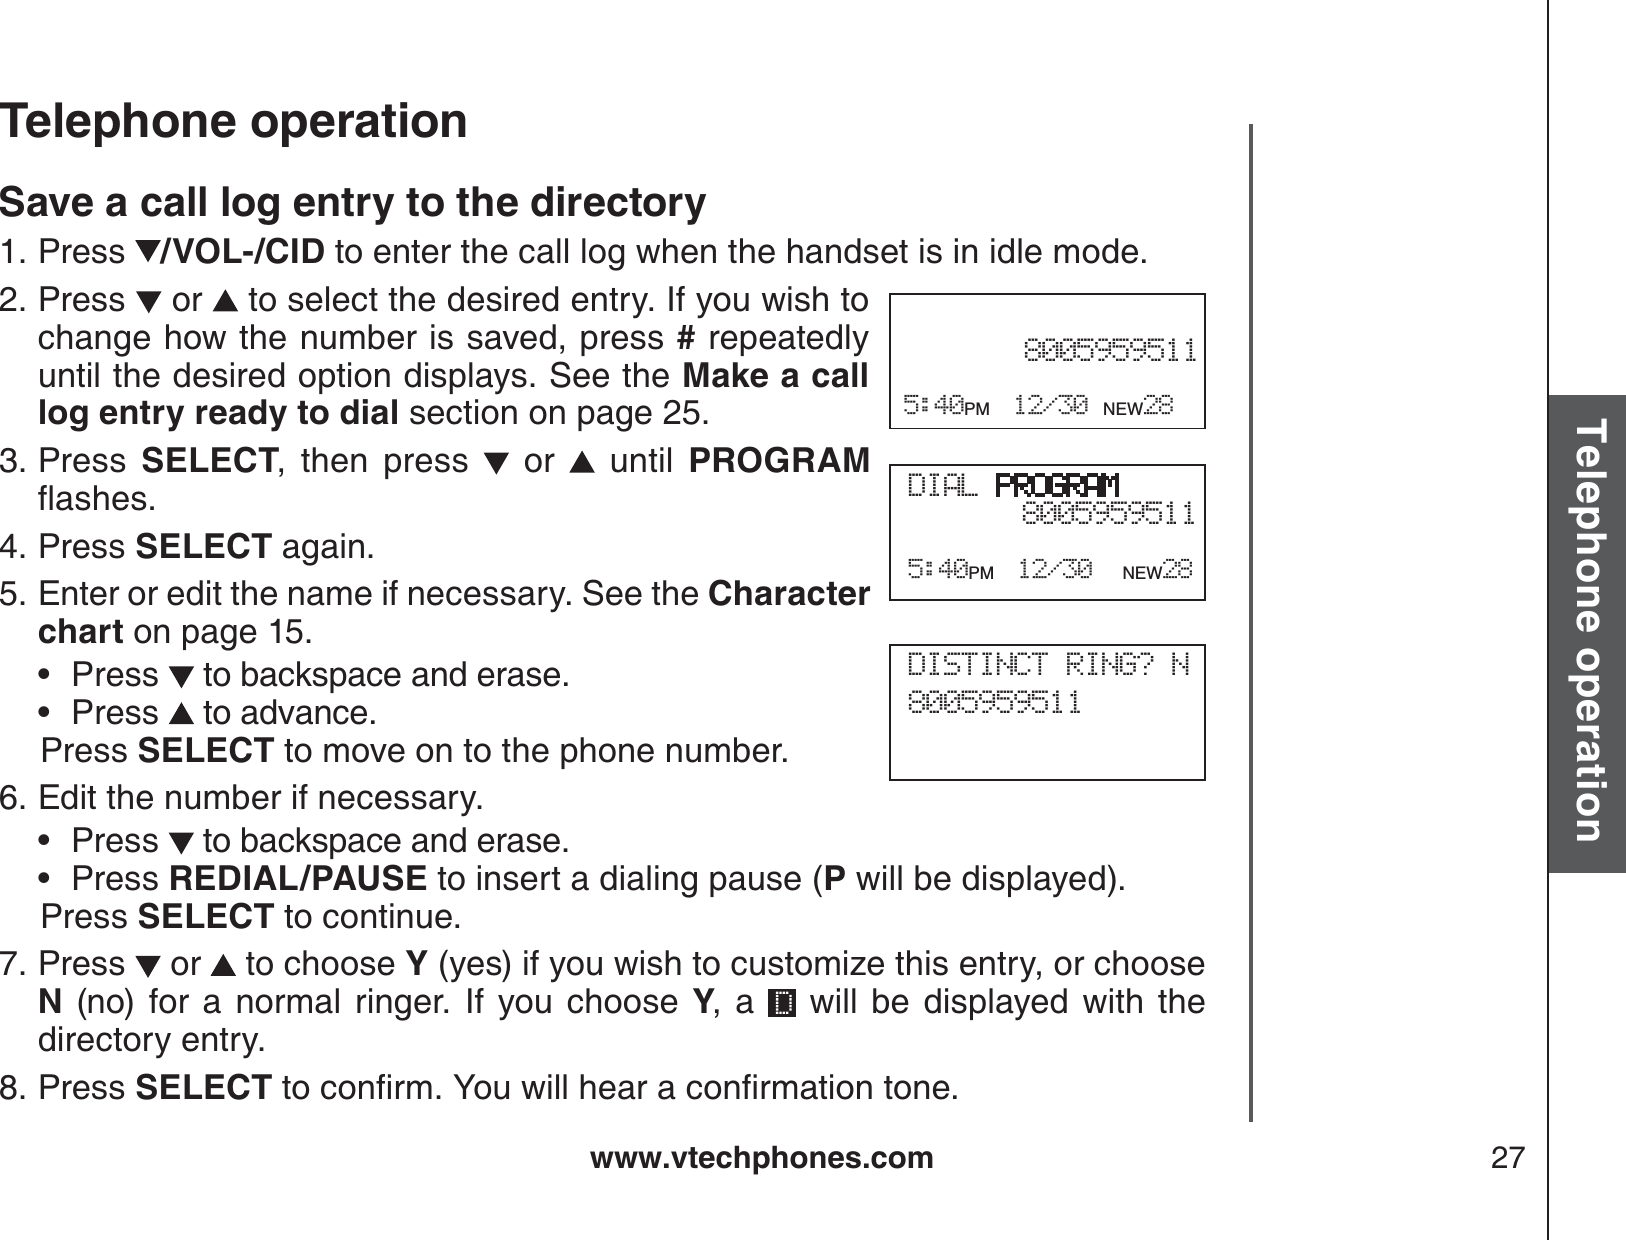 www.vtechphones.com 27Basic operationTelephone operationTelephone operationSave a call log entry to the directoryPress  /VOL-/CID to enter the call log when the handset is in idle mode. Press   or   to select the desired entry. If you wish to change how the number is saved, press # repeatedly until the desired option displays. See the Make a call log entry ready to dial section on page 25.Press  SELECT, then press   or   until PROGRAMƀCUJGUPress SELECT again.Enter or edit the name if necessary. See the Character chart on page 15.Press  to backspace and erase.Press  to advance.   Press SELECT to move on to the phone number.Edit the number if necessary.Press   to backspace and erase.Press REDIAL/PAUSE to insert a dialing pause (P will be displayed).   Press SELECT to continue.Press   or   to choose Y (yes) if you wish to customize this entry, or choose N (no) for a normal ringer. If you choose Y, a   will be displayed with the directory entry.Press SELECTVQEQPſTO;QWYKNNJGCTCEQPſTOCVKQPVQPG1.2.3.4.5.••6.••7.8.DIAL PROGRAM80059595115:40PM 12/30 NEW288005959511 5:40PM 12/30 NEW28DISTINCT RING? N8005959511